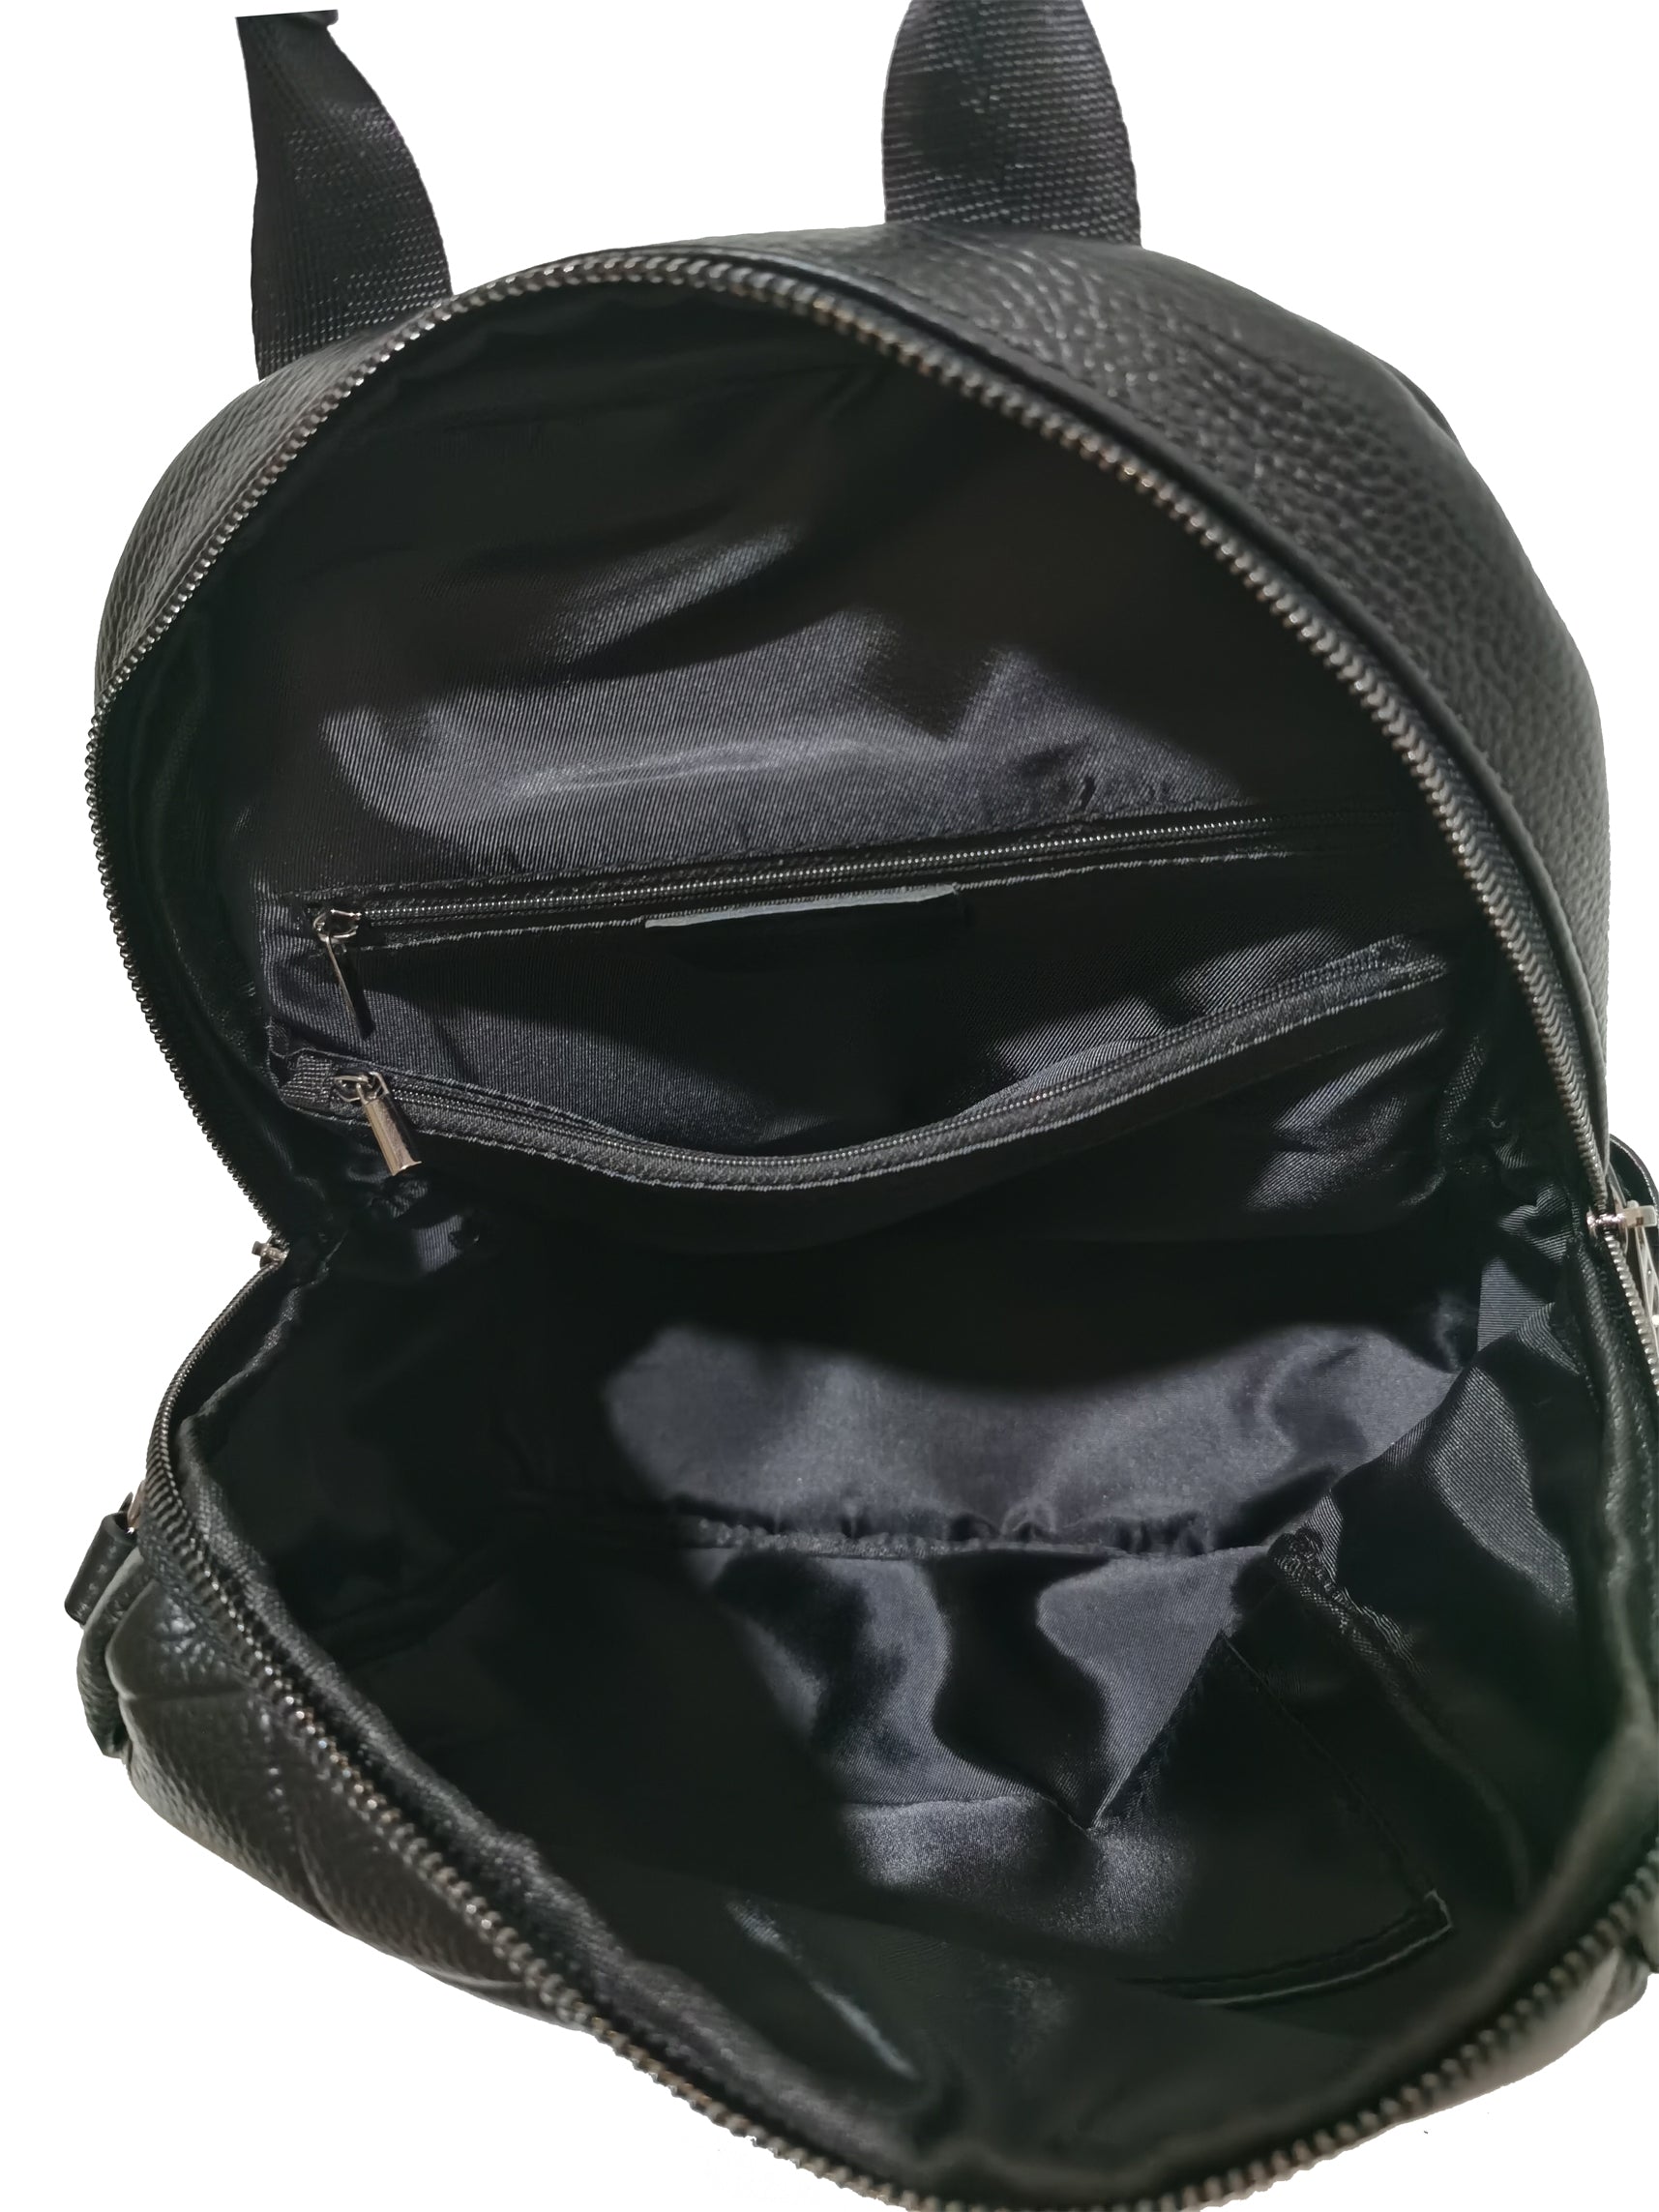 Women's and Men's unisex cowhide leather Diamond V2 design backpack by Tomorrow Closet